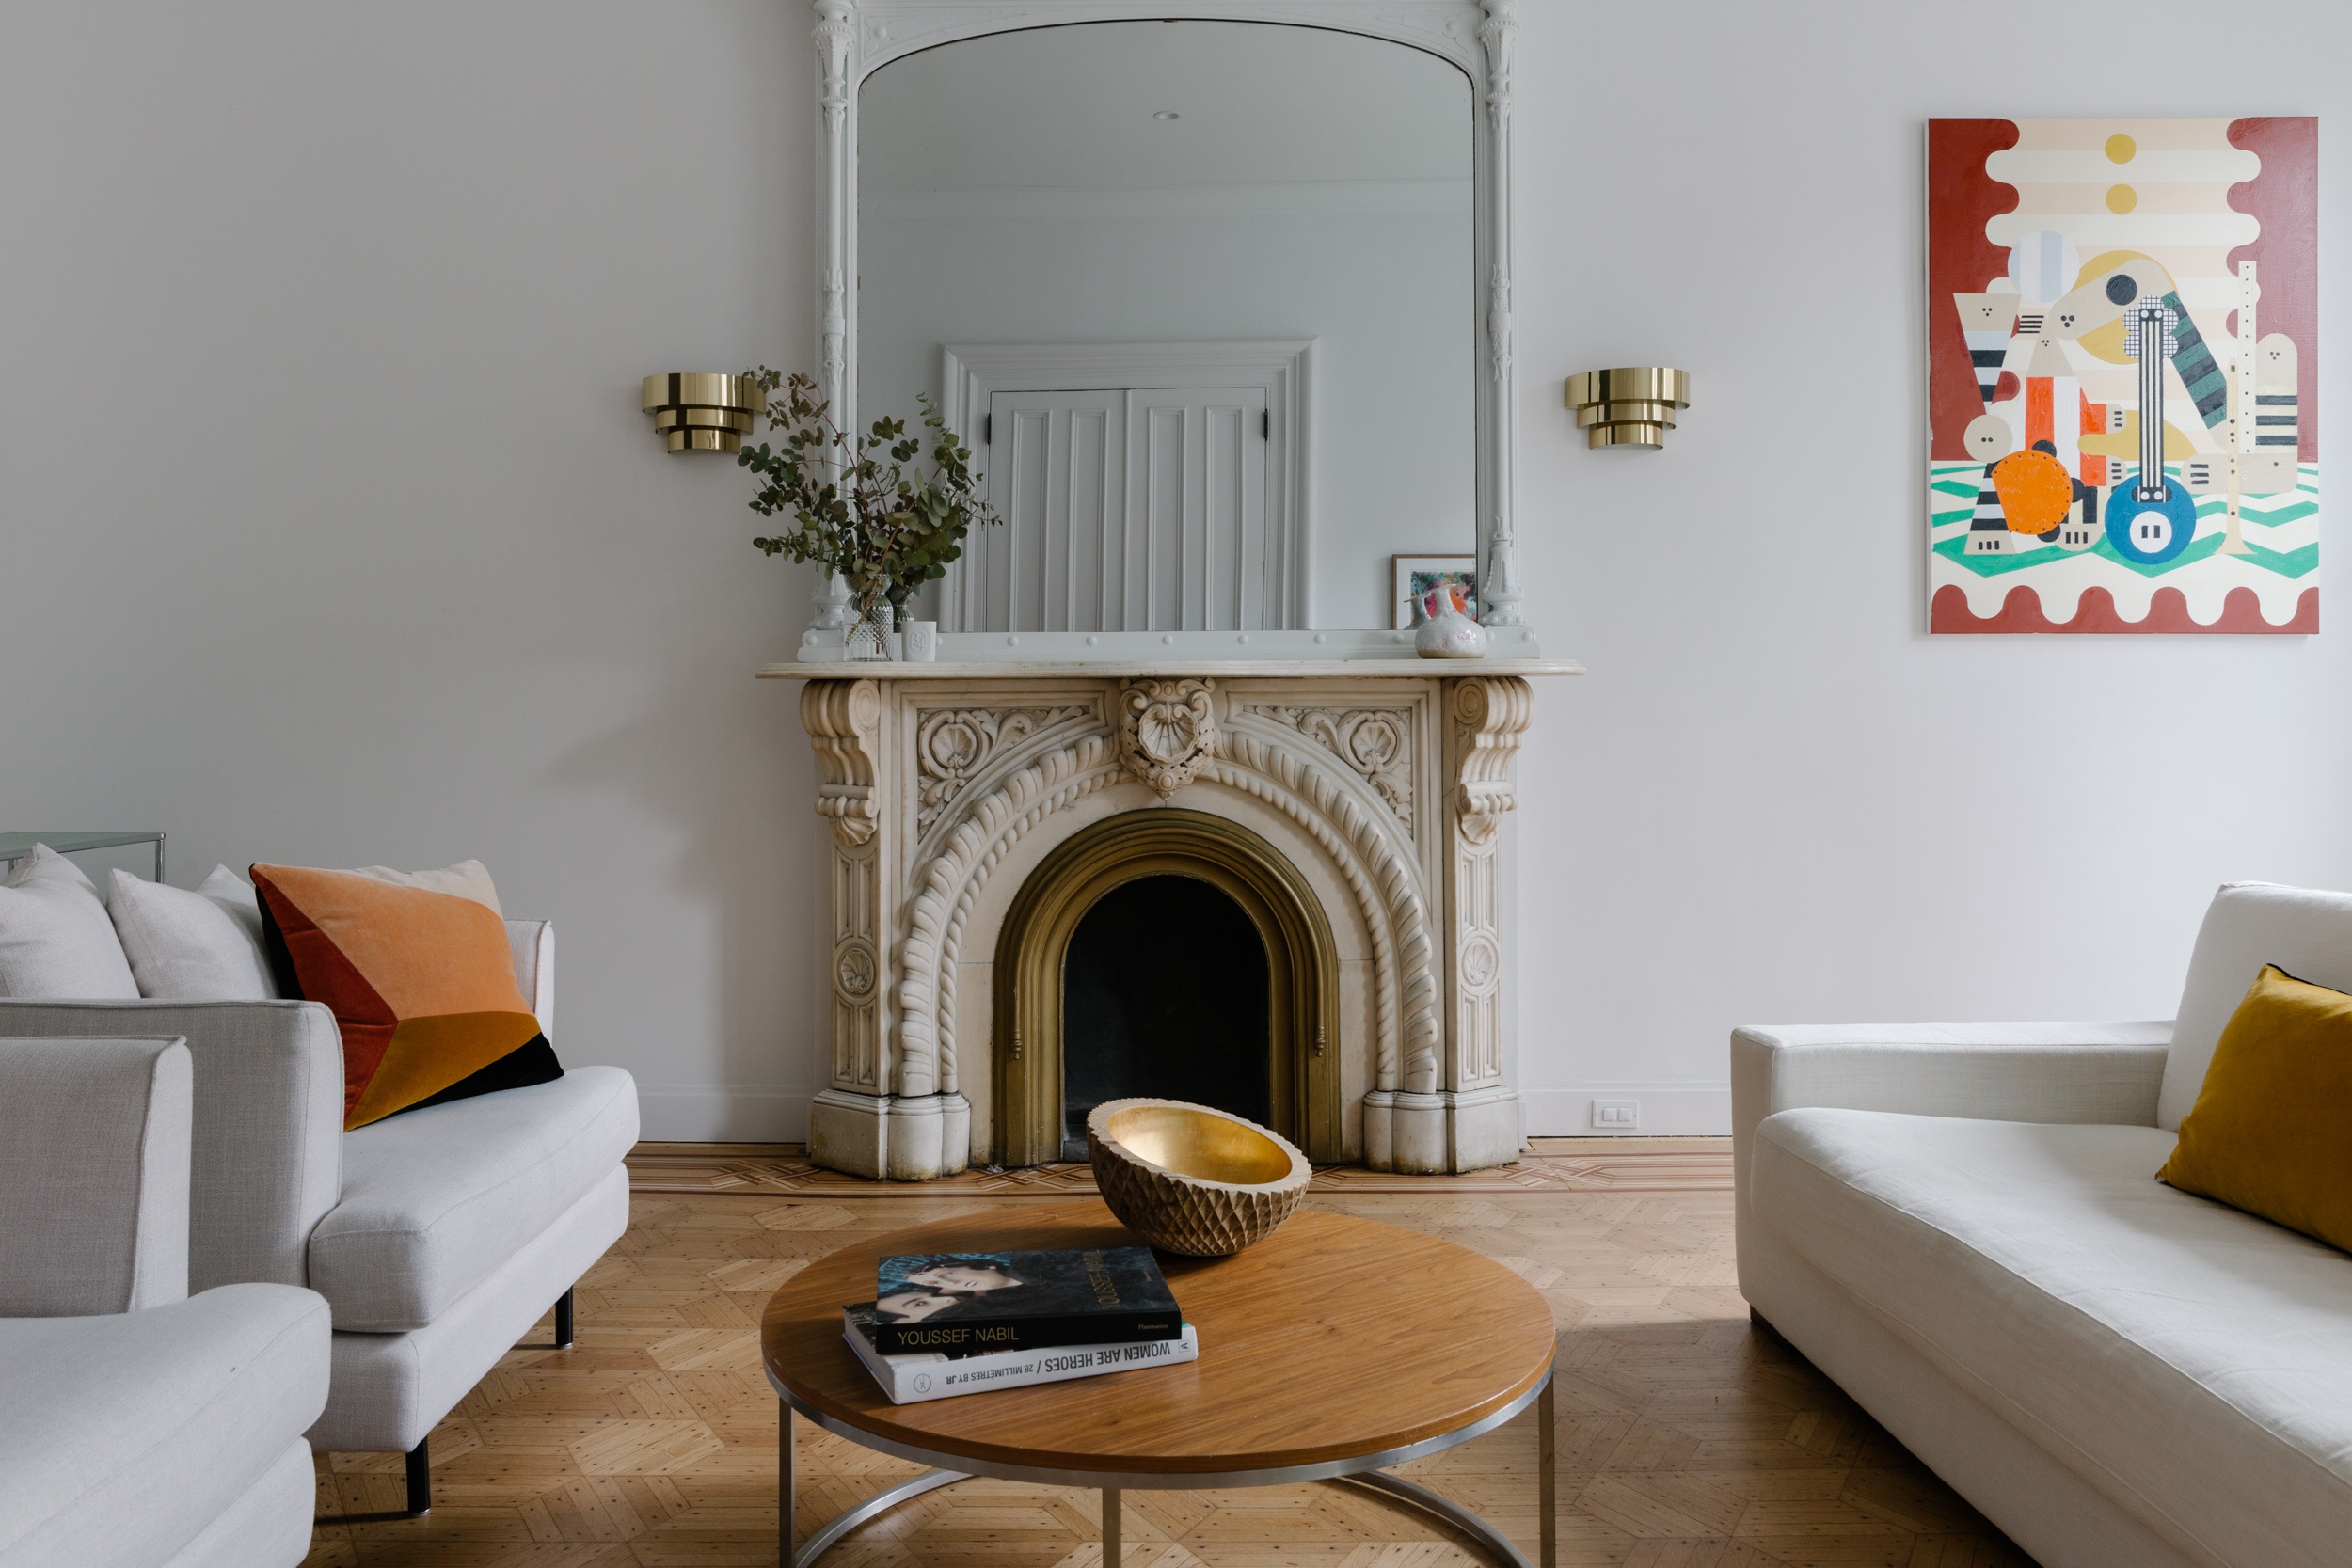 Historic fireplace with modern art in a renovated living room